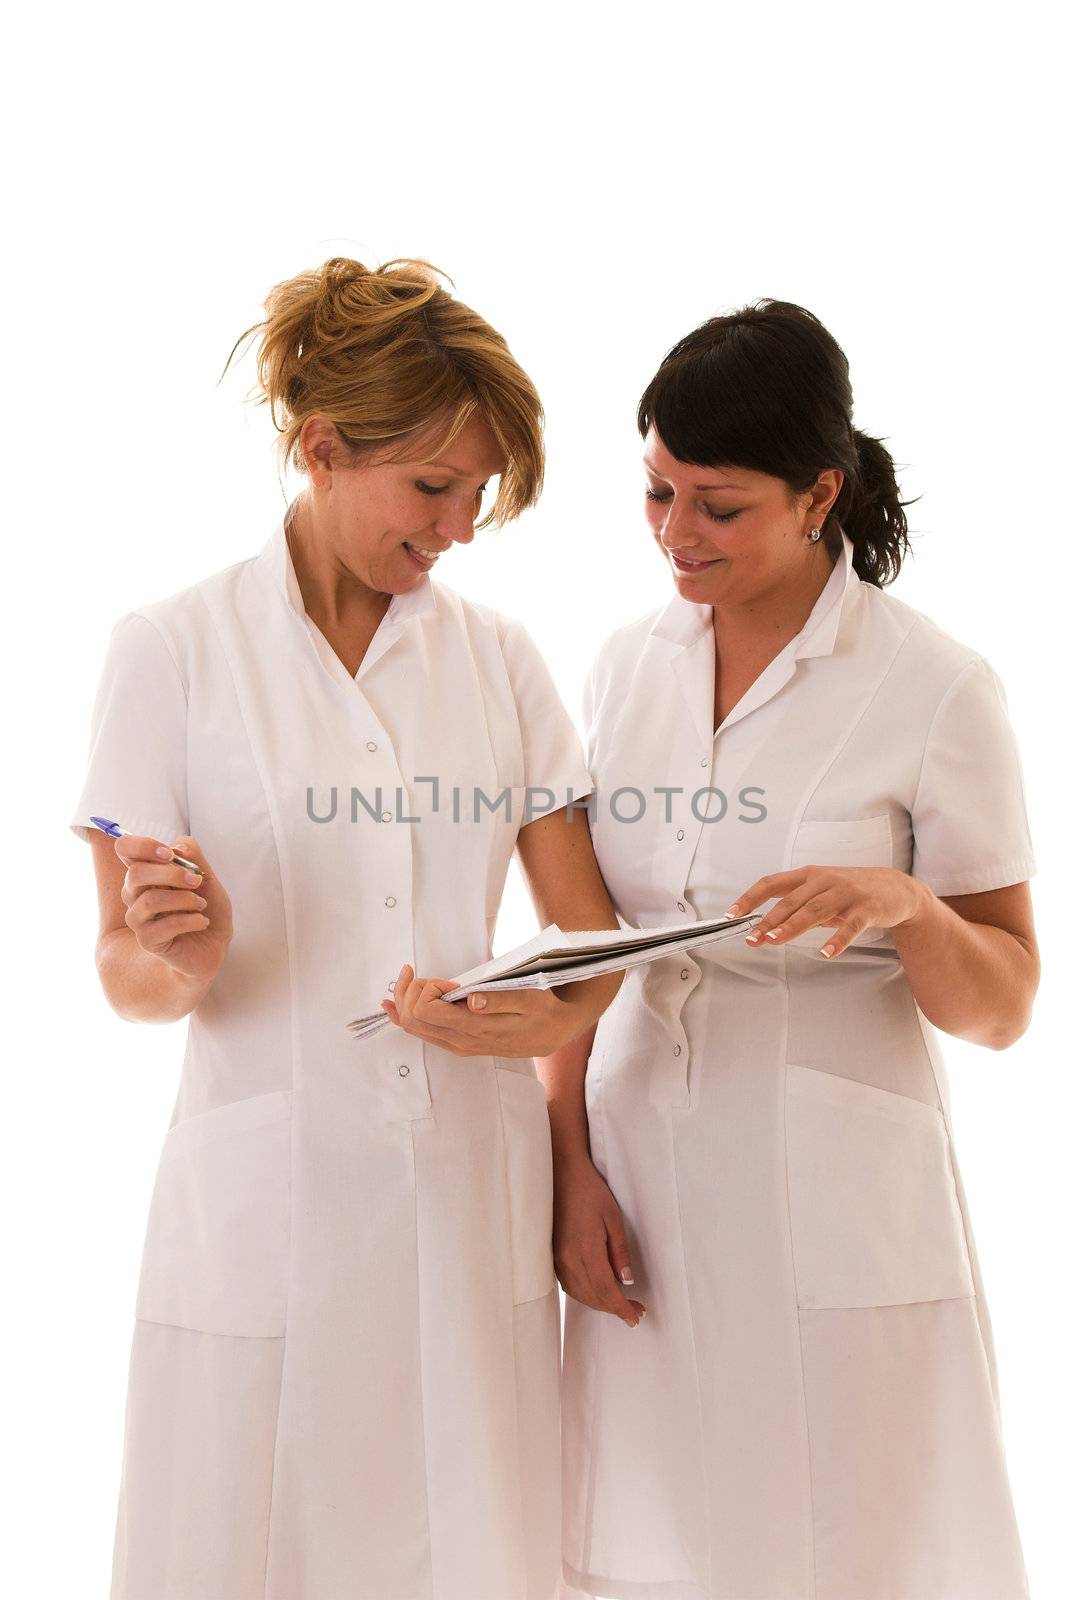 Two nurses standing next to each other compairing notes